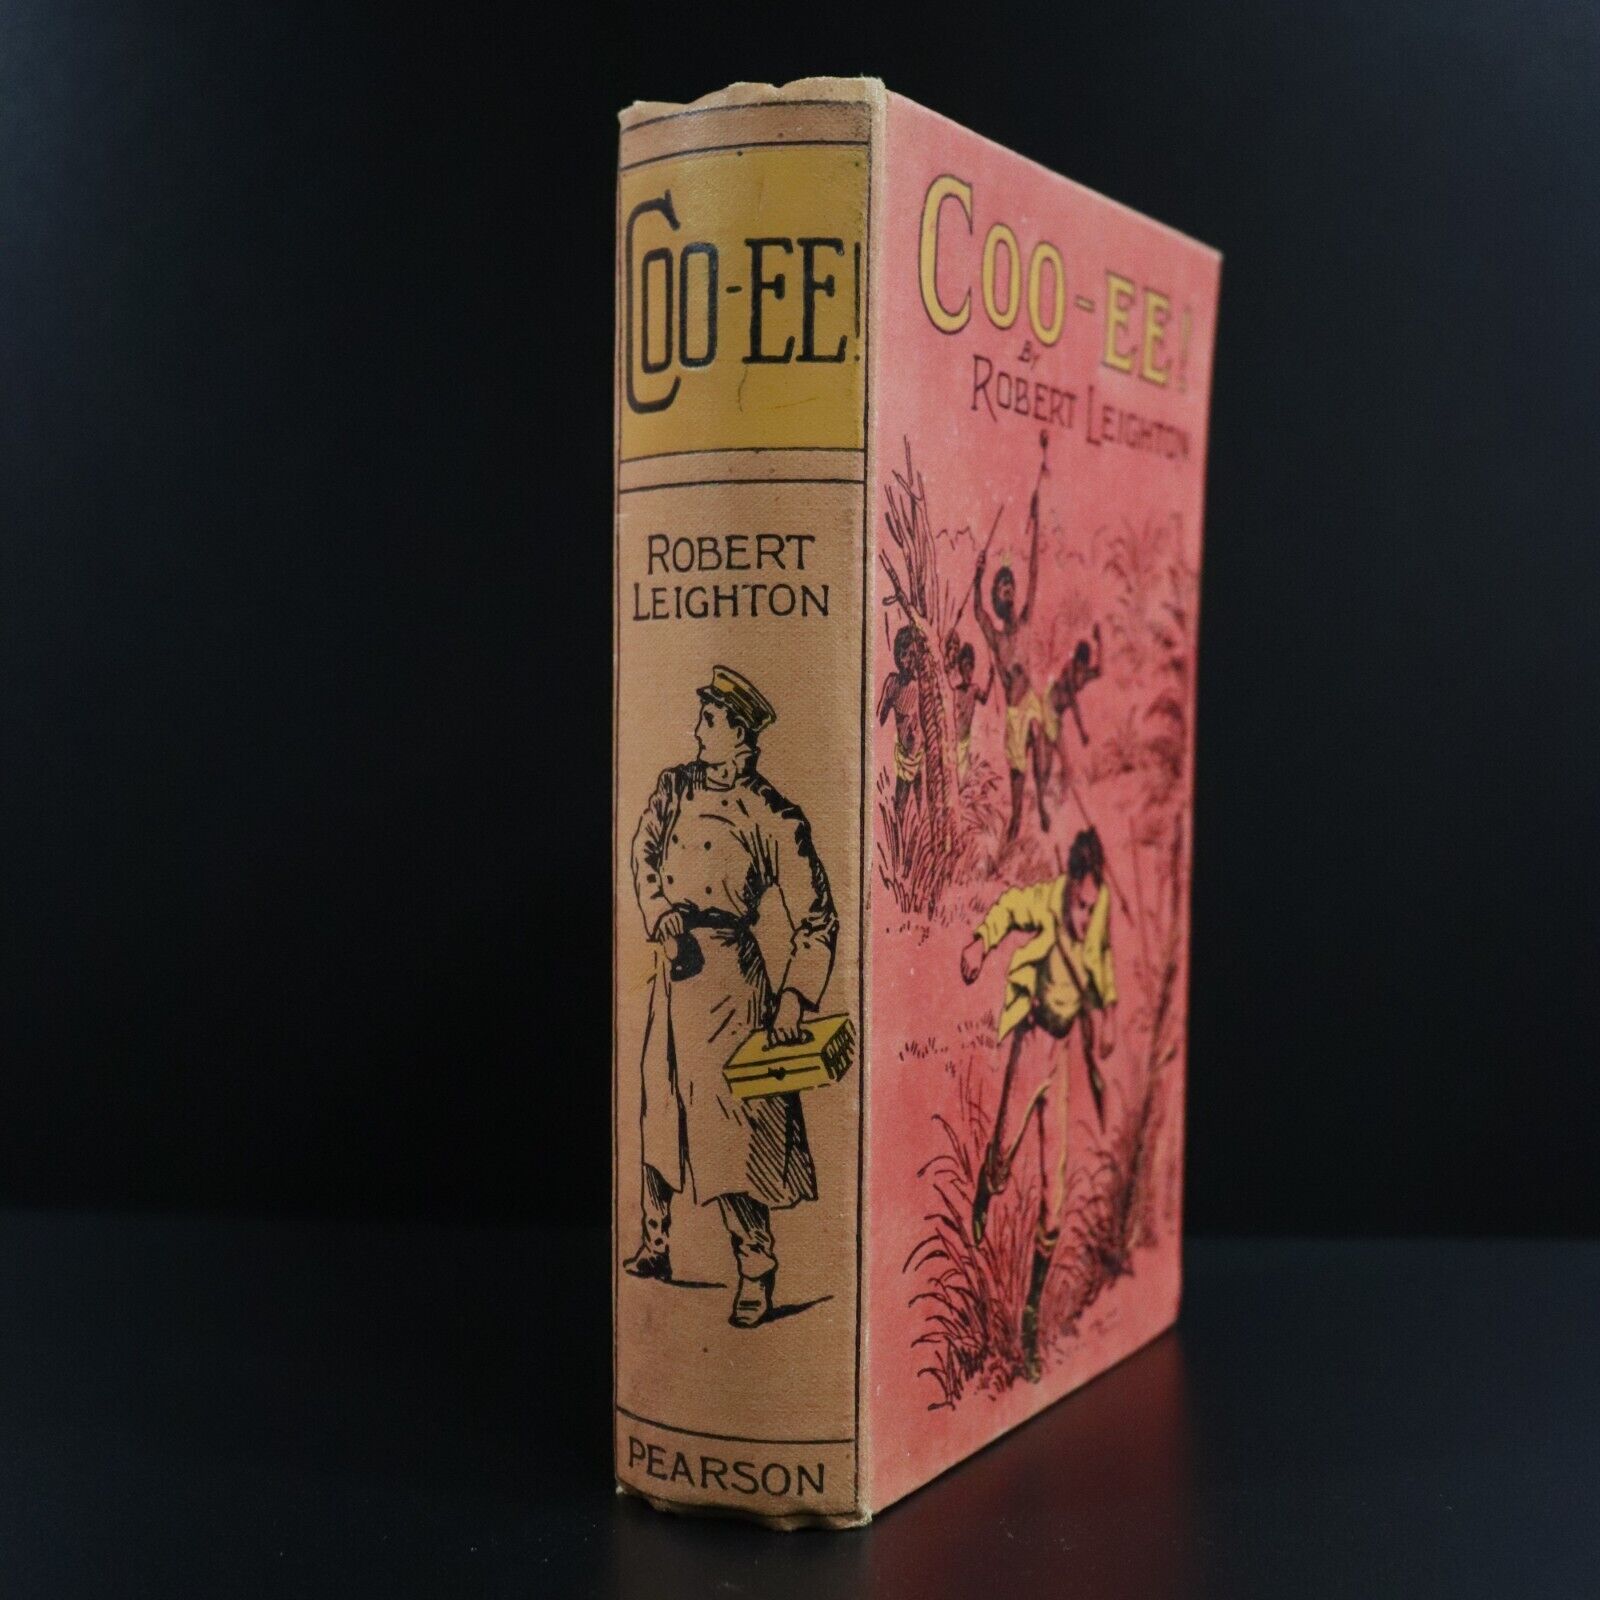 1922 Coo-ee! by Robert Leighton Antique Illustrated Australian Fiction Book